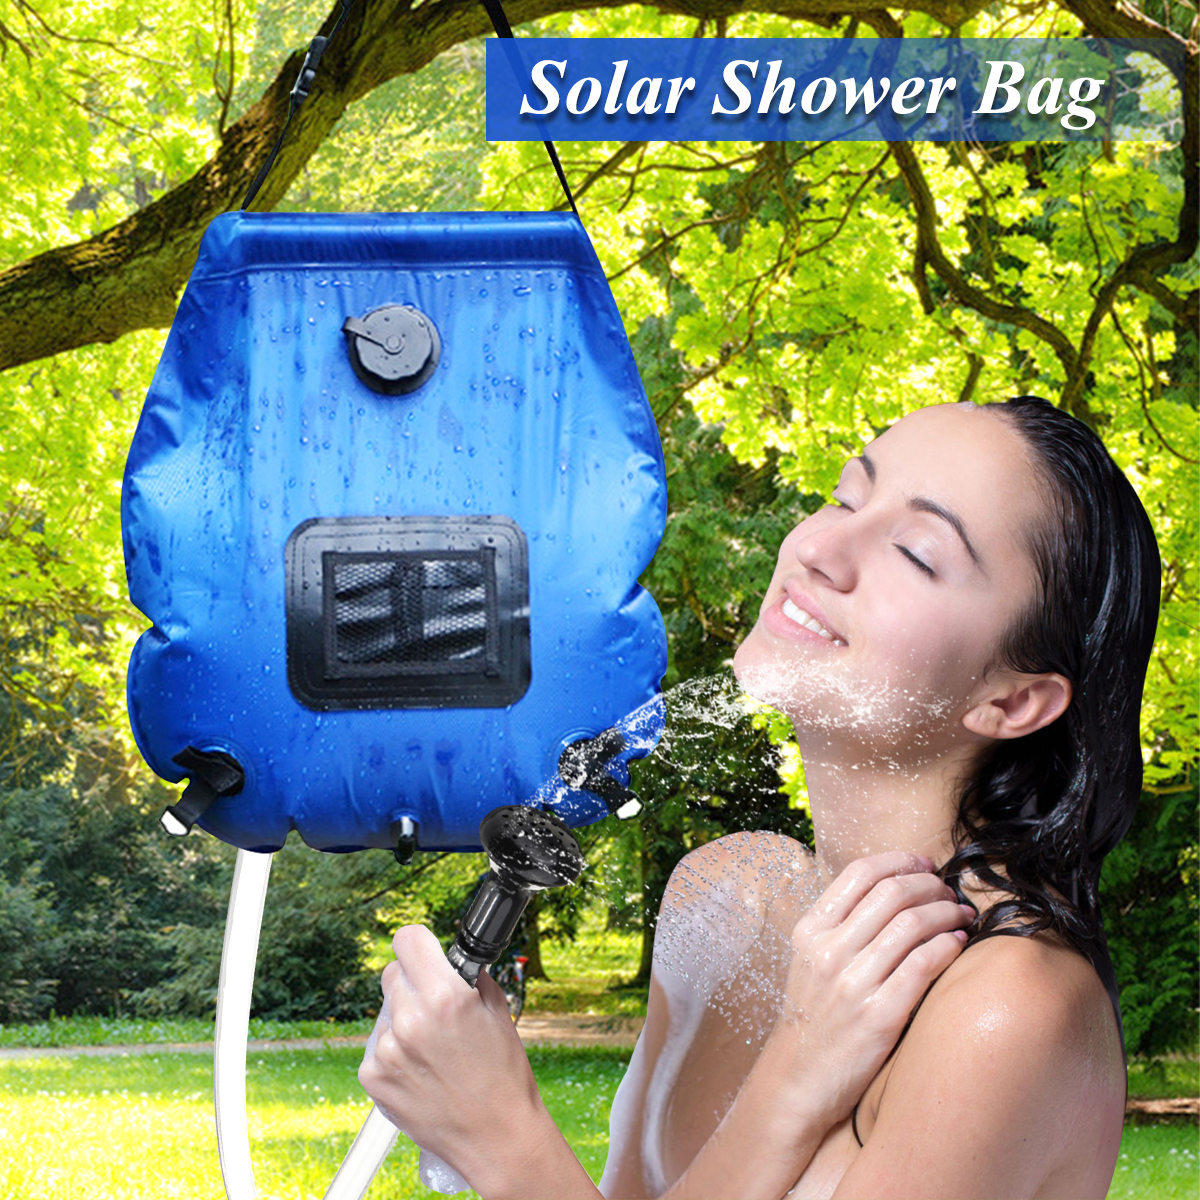 20L-Foldable-Portable-Water-Shower-Bathing-Bag-Solar-Energy-Heated-PVC-Outdoor-Travel-Camping-1724741-5